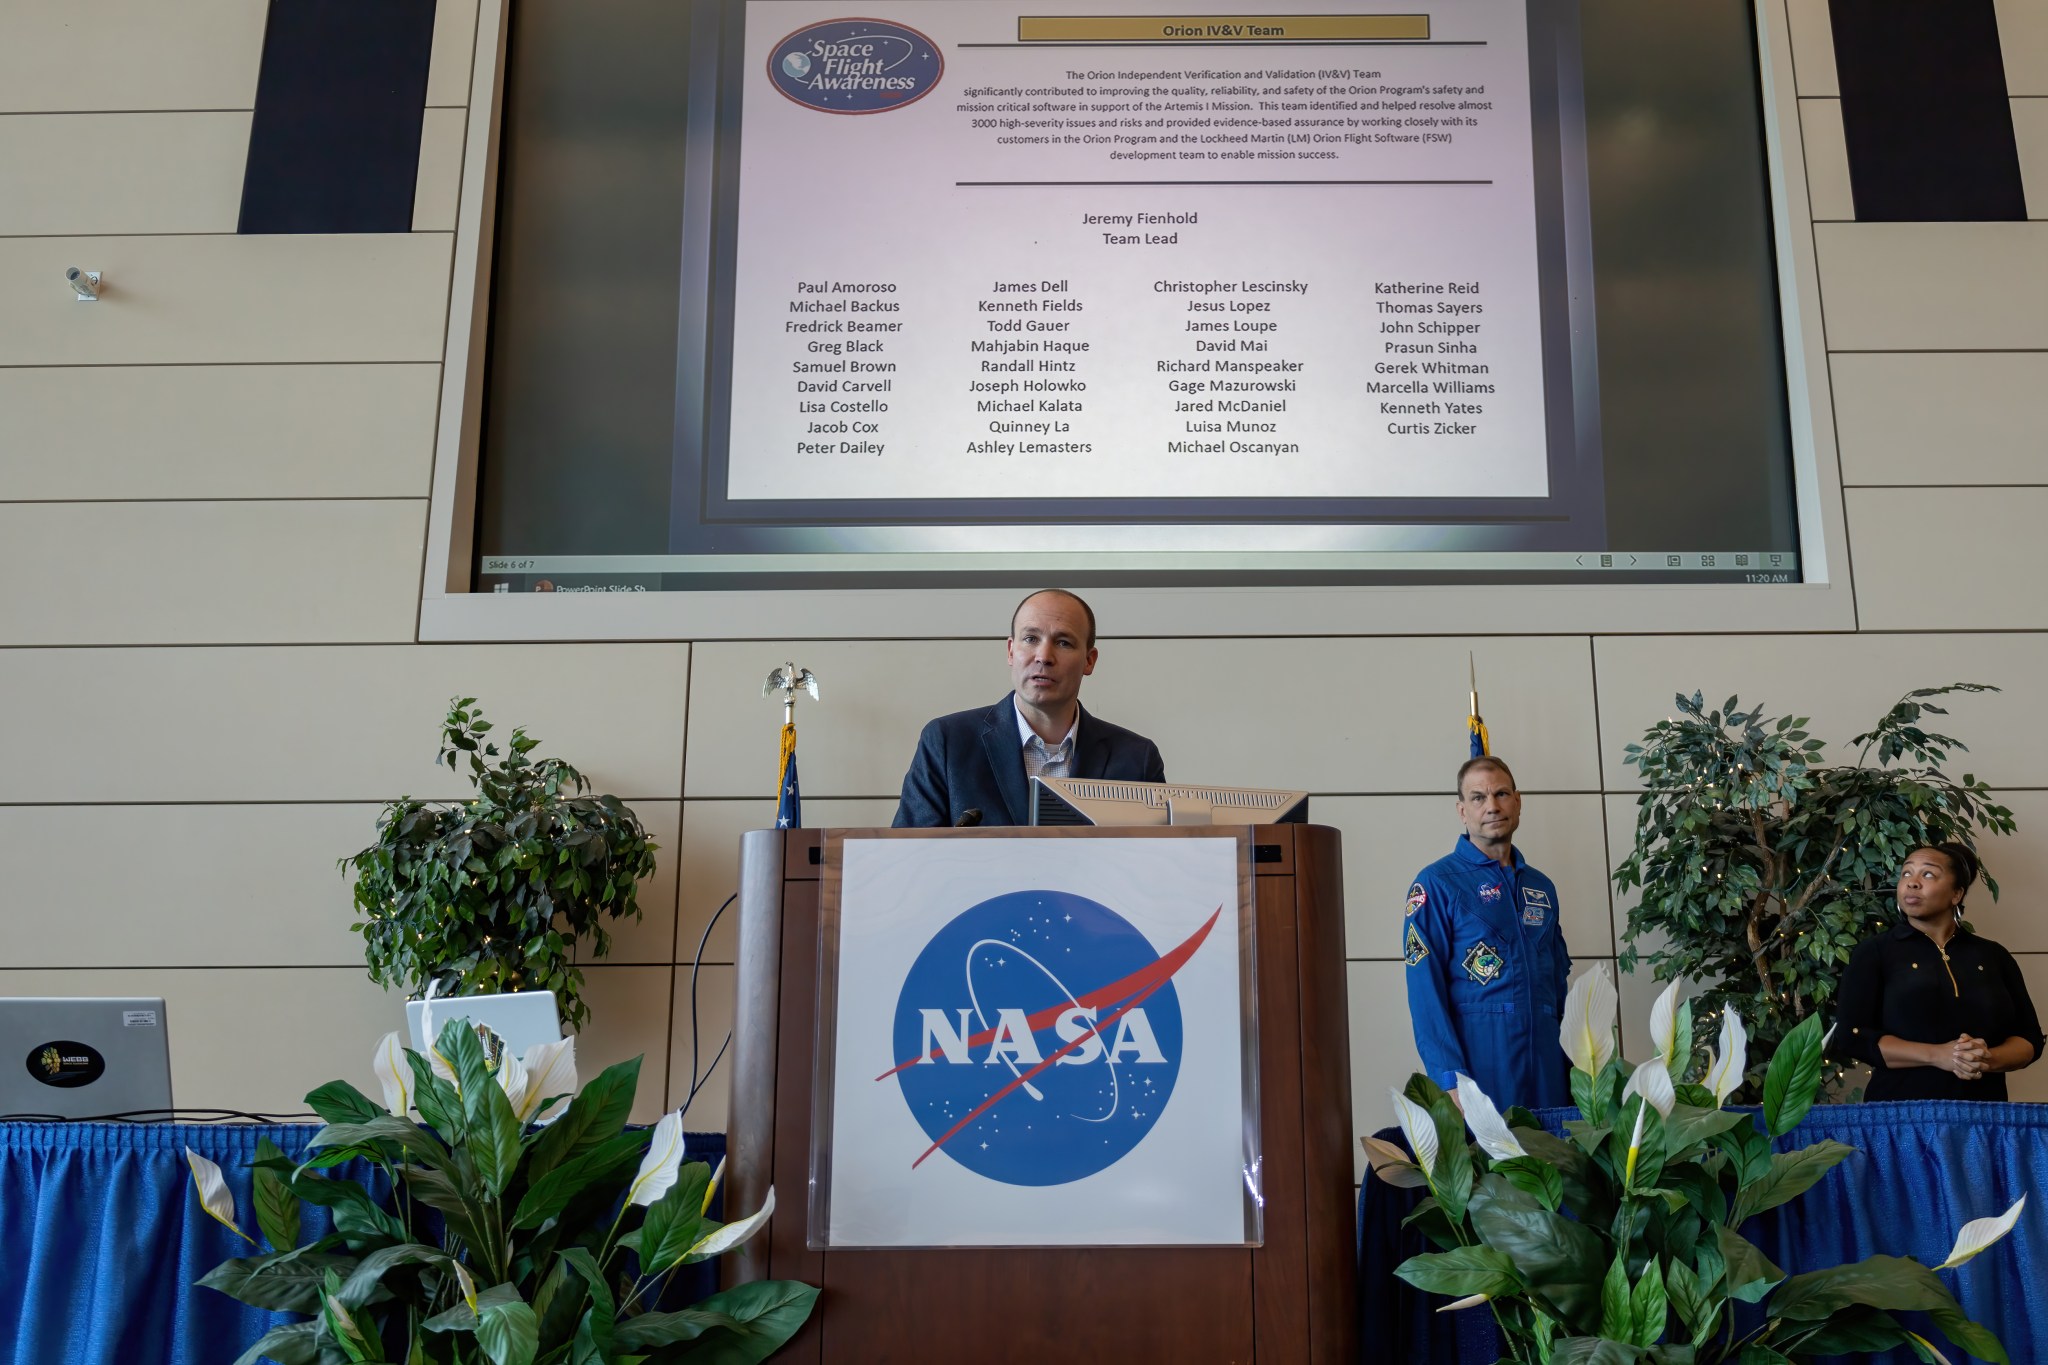 Man speaking behind a podium with a NASA logo on the front of the podium. A man in a blue jumpsuit is standing beside him. A large screen is behind them with award winners names.